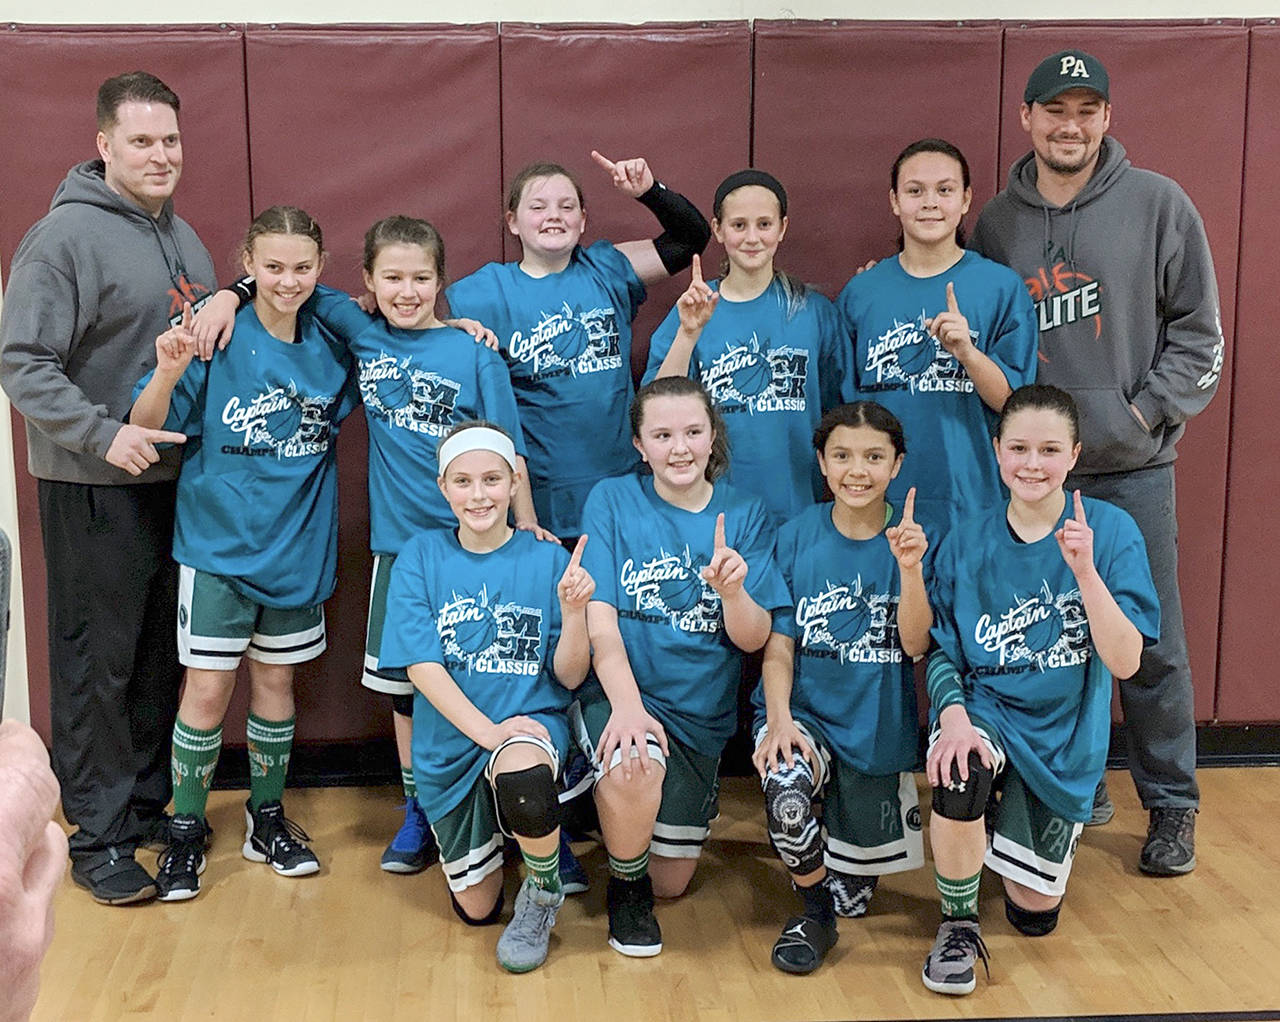 PA Elite won the 5th grade girls basketball championship over the weekend at the annual Port Angeles Parks and Recreation Martin Luther King Jr. Tournament. Team members and coaches are, back row from left, Coach Dustin Clark, Kennedy Ronglein, Lindsay Smith, Leah Flanagan, Becca Manson, Clare Bowechop, Coach Ryan Smith and front, Teanna Clark, Shyanne Hunter, Qwaapeys Greene and Brooklyn Johnson.